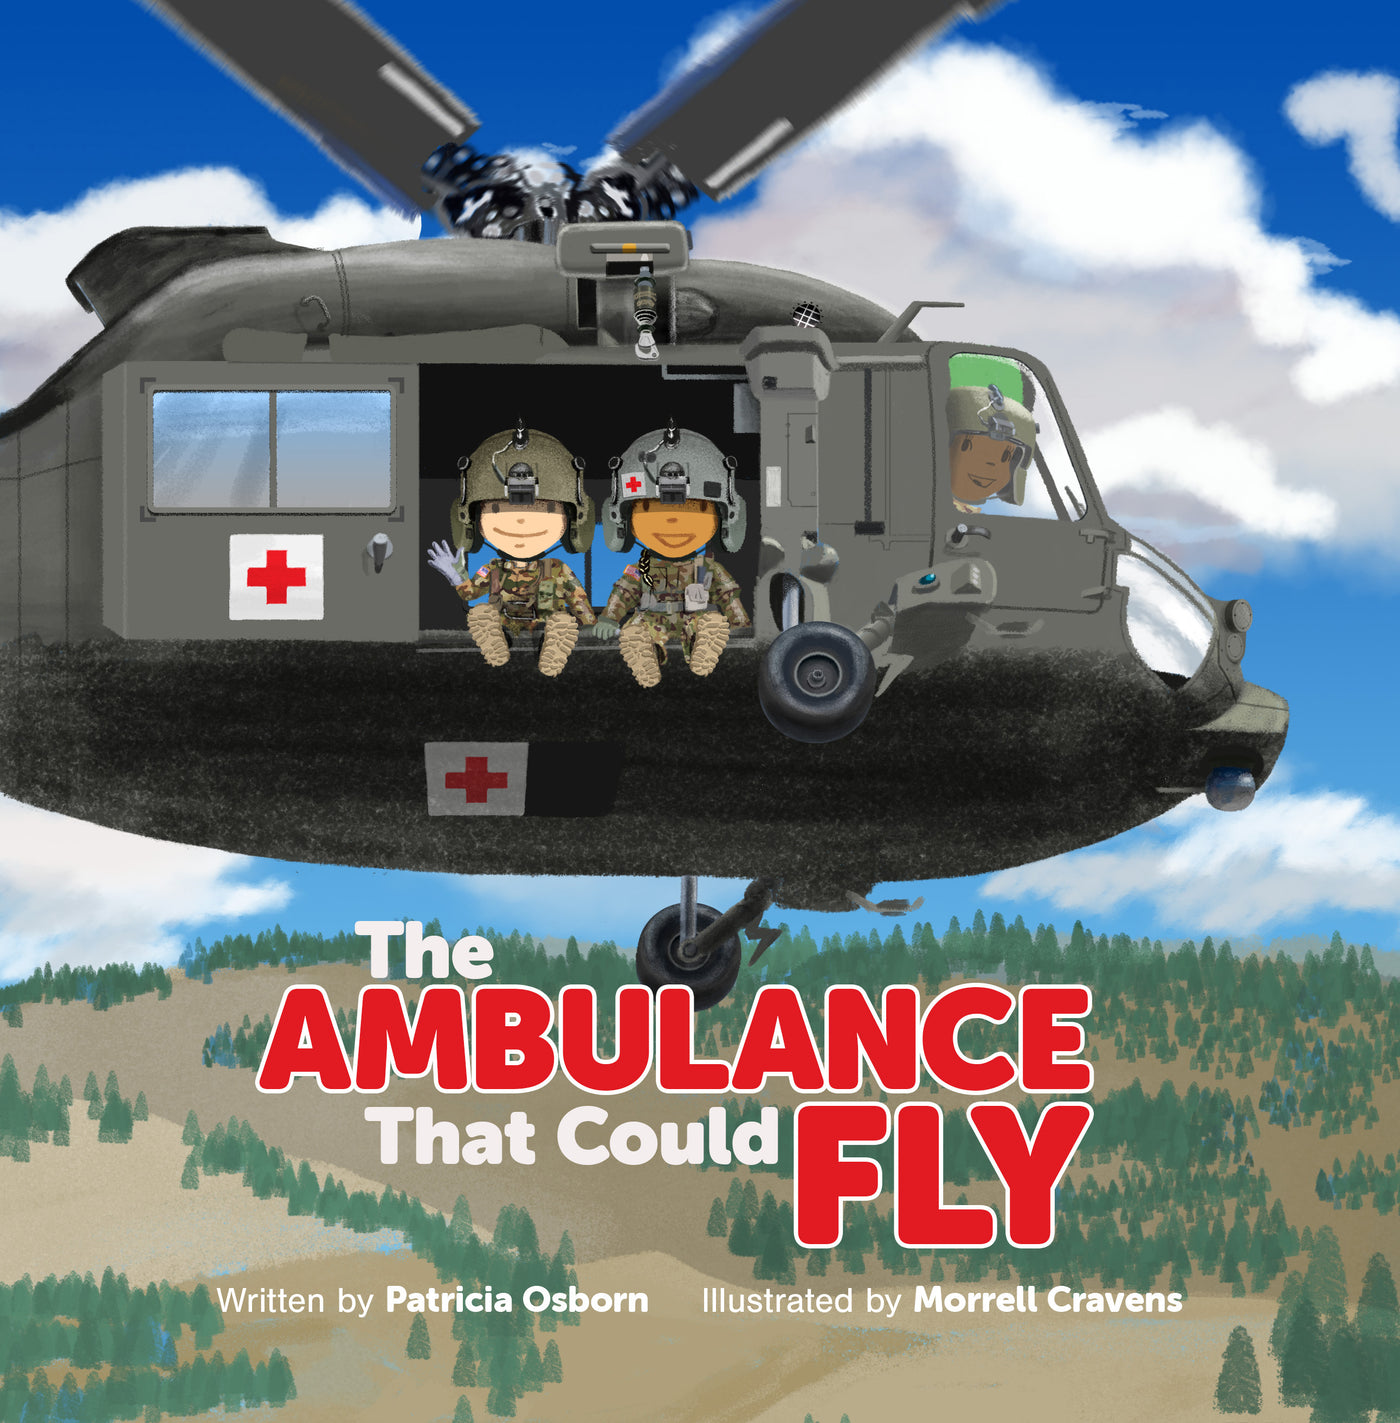 THE AMBULANCE THAT COULD FLY (HARDCOVER)